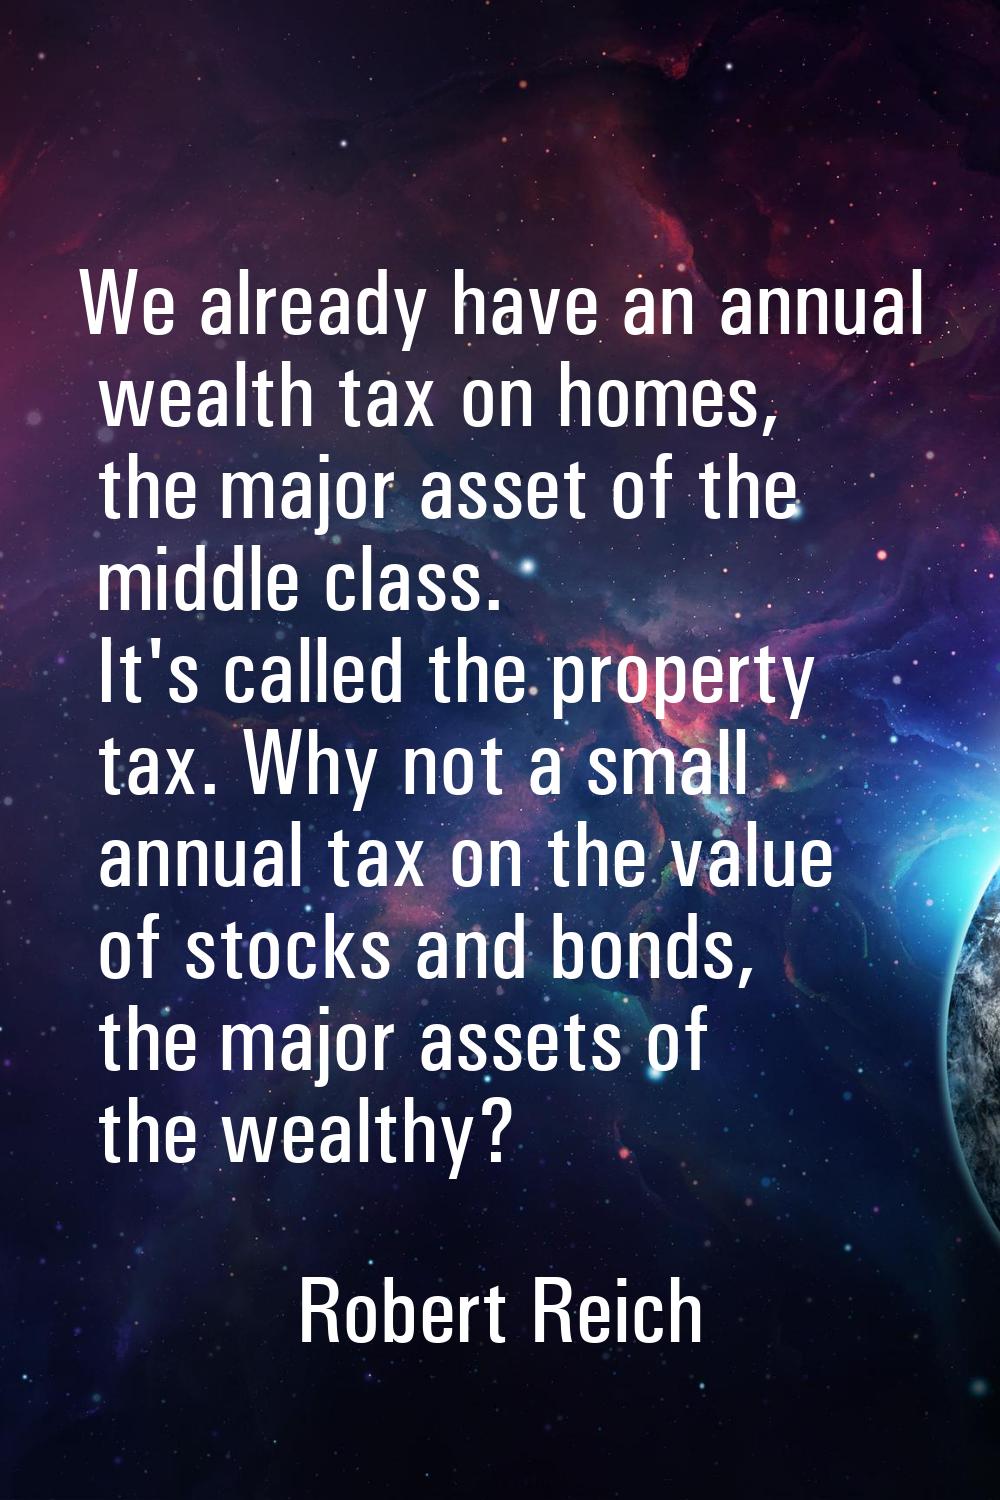 We already have an annual wealth tax on homes, the major asset of the middle class. It's called the